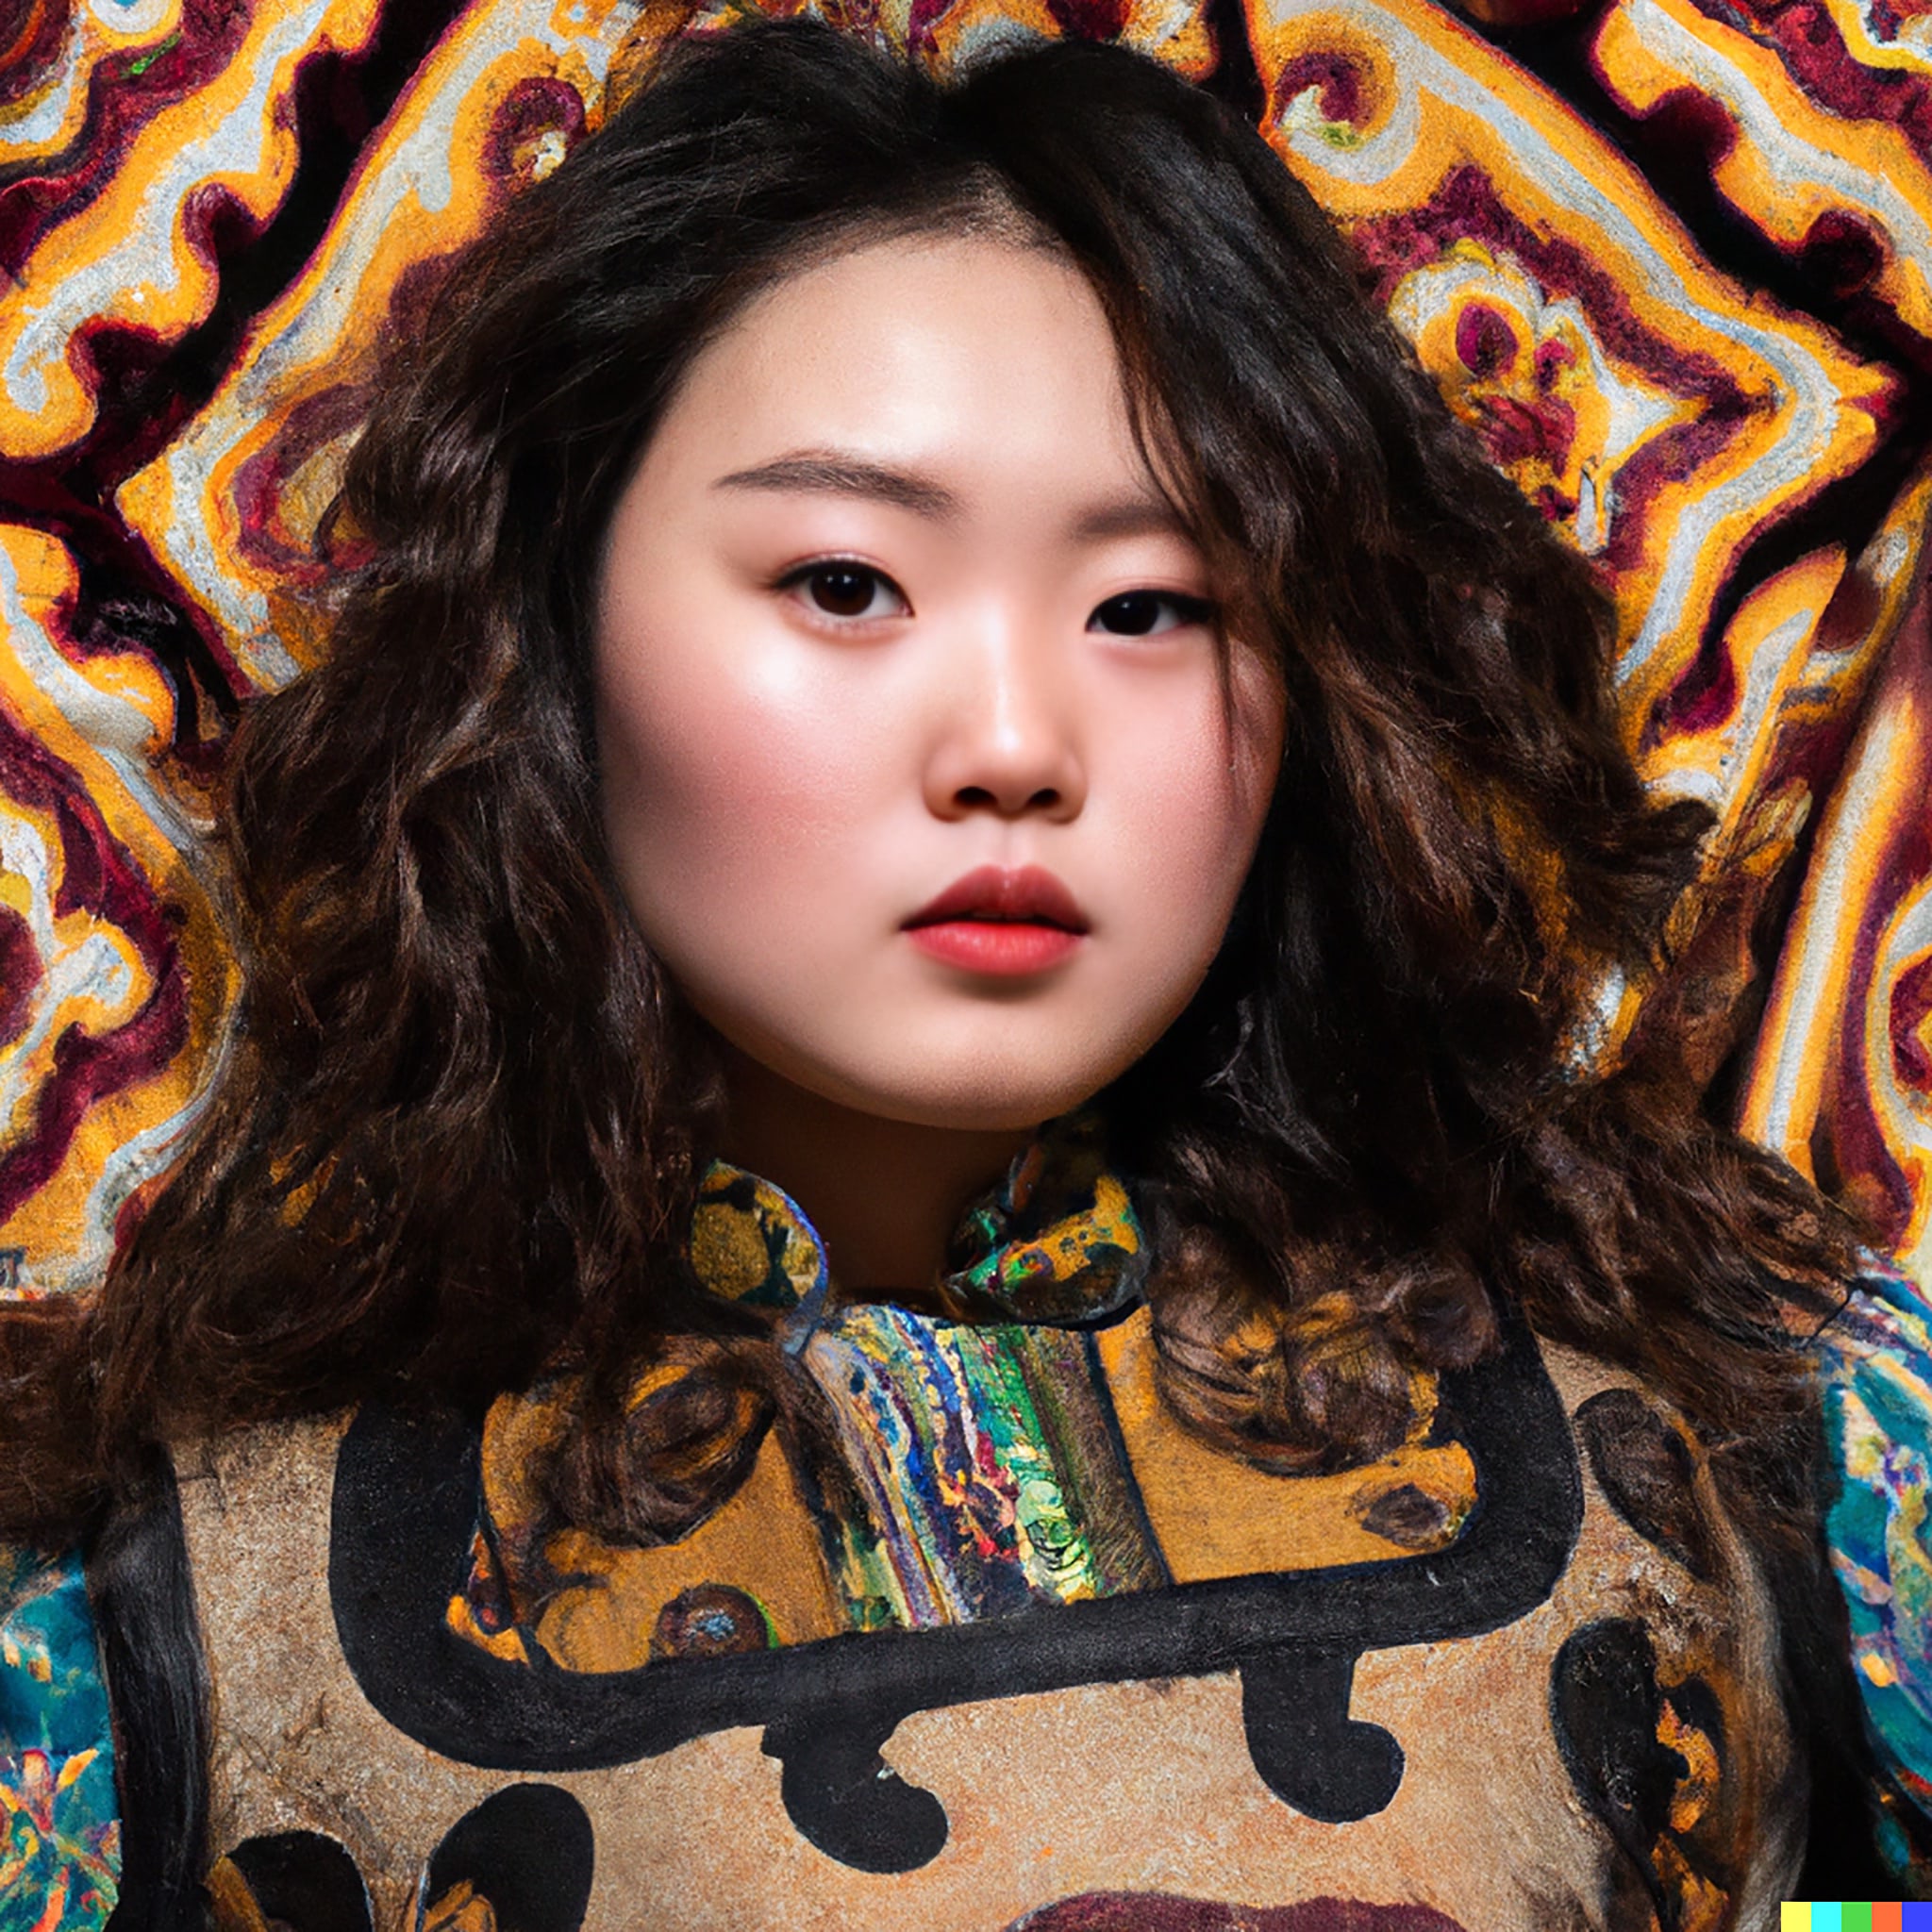 women-a-brown-curled-hair-in-a-mongolian-dress-3